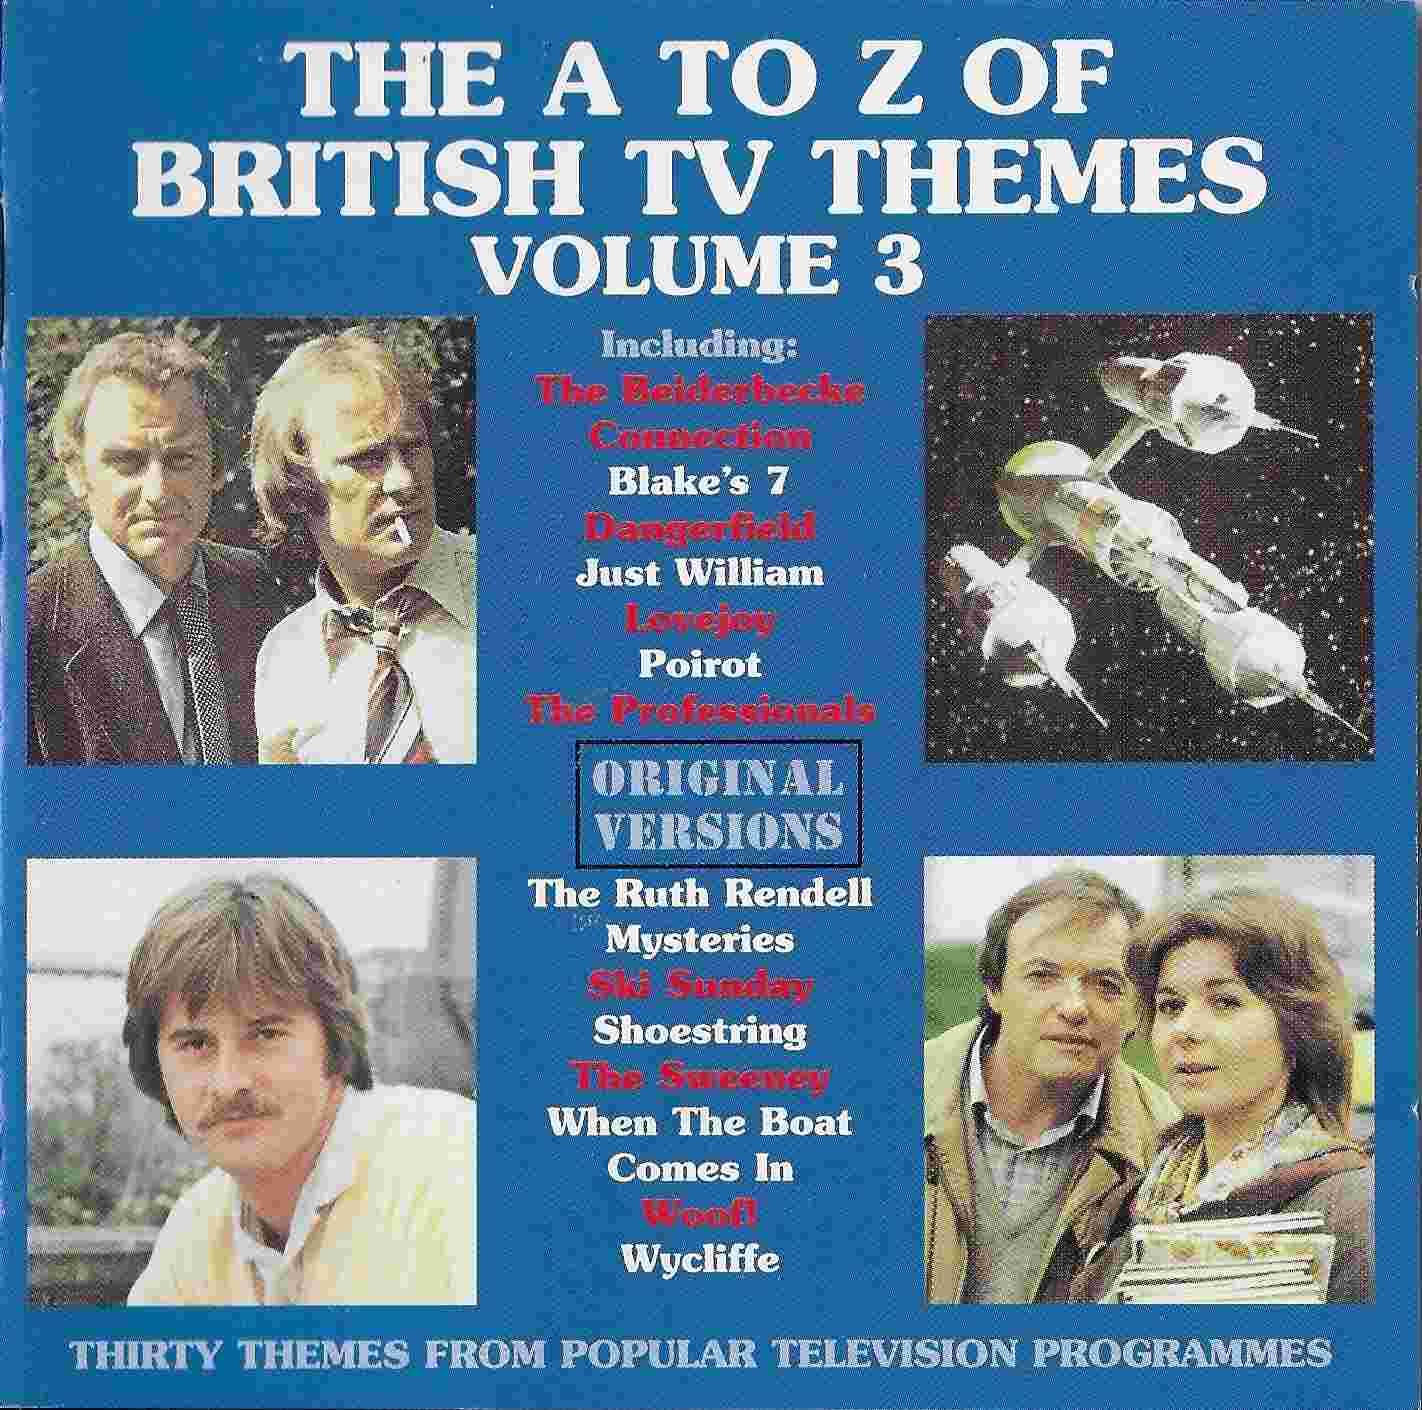 Picture of PLAY 010 The a to z of British TV themes - Volume 3 by artist Various from ITV, Channel 4 and Channel 5 library